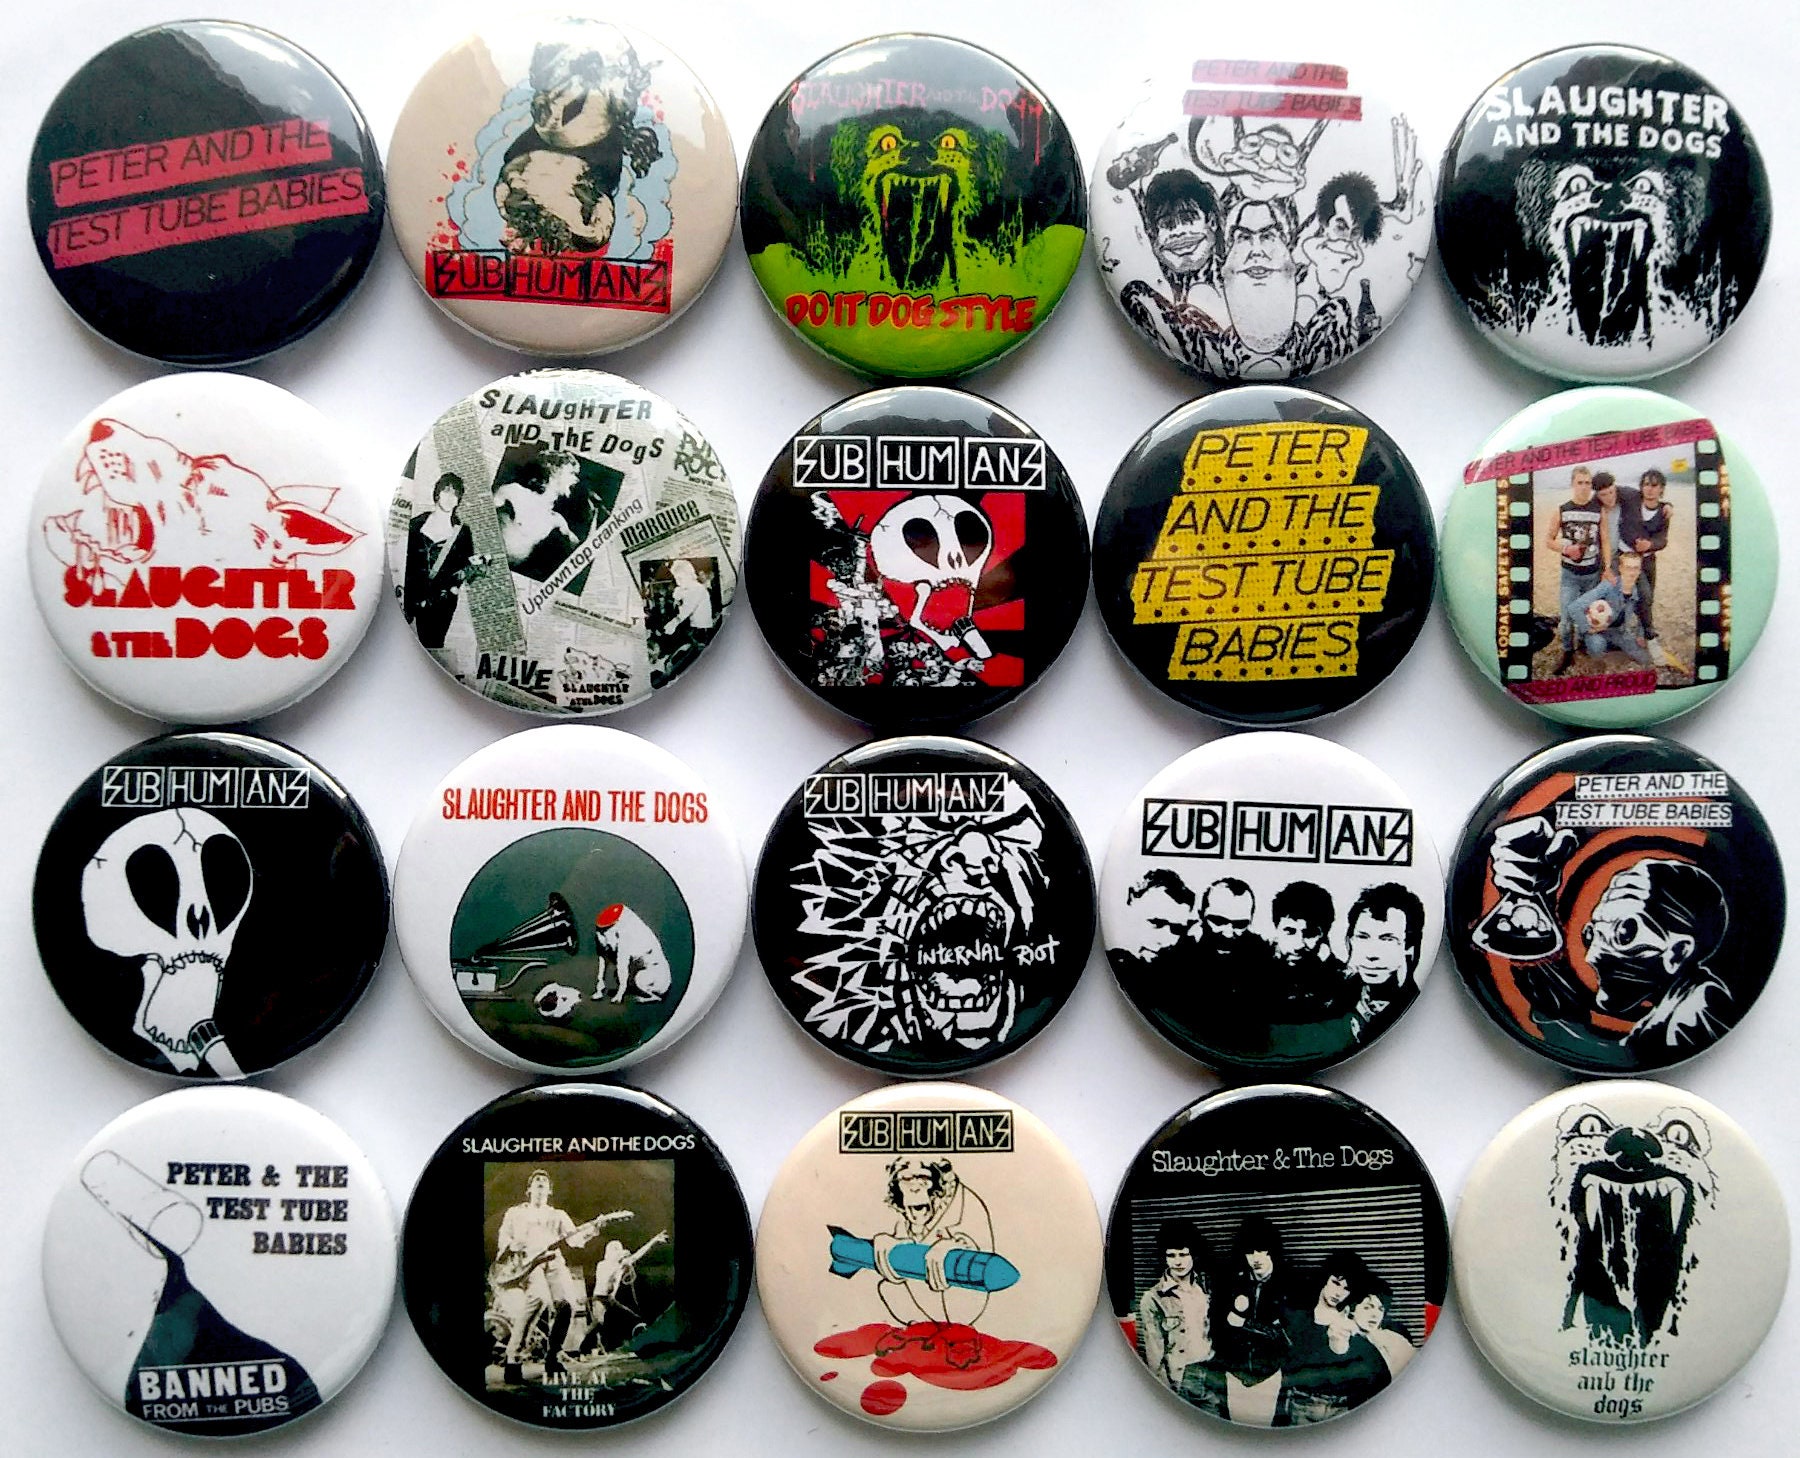 Punk Rock Tinplate Serial Soft Button Pin Rock Roll Stay Punk City Boy  Metal Brooch Backpack Jackets Badge For Rock Music Lovers